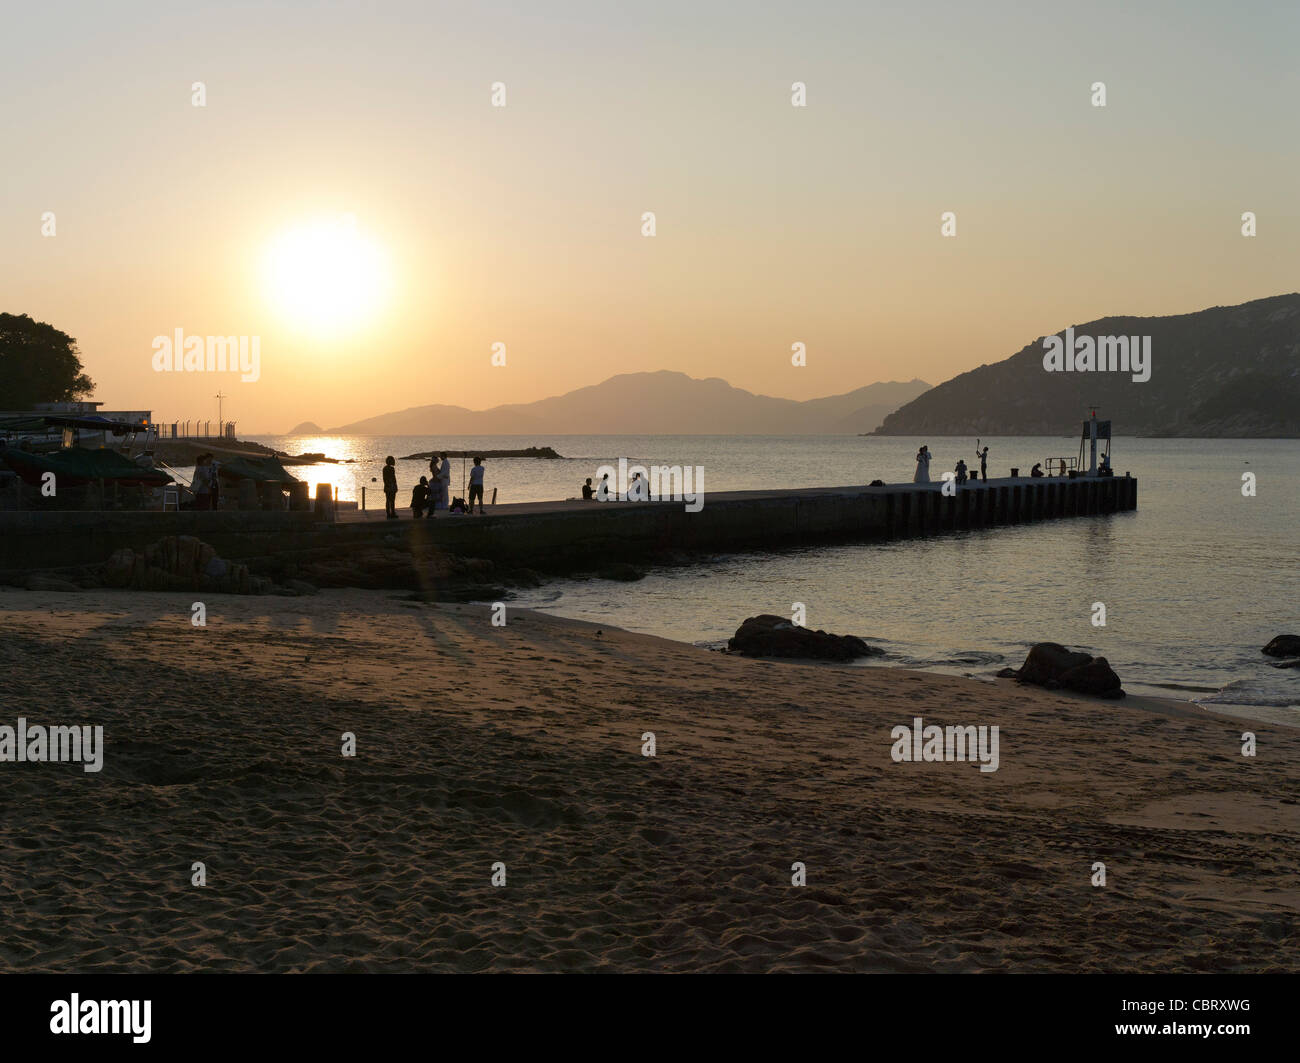 dh St Stephens beach STANLEY HONG KONG Chinese couples wedding photographs sunset pier Stock Photo